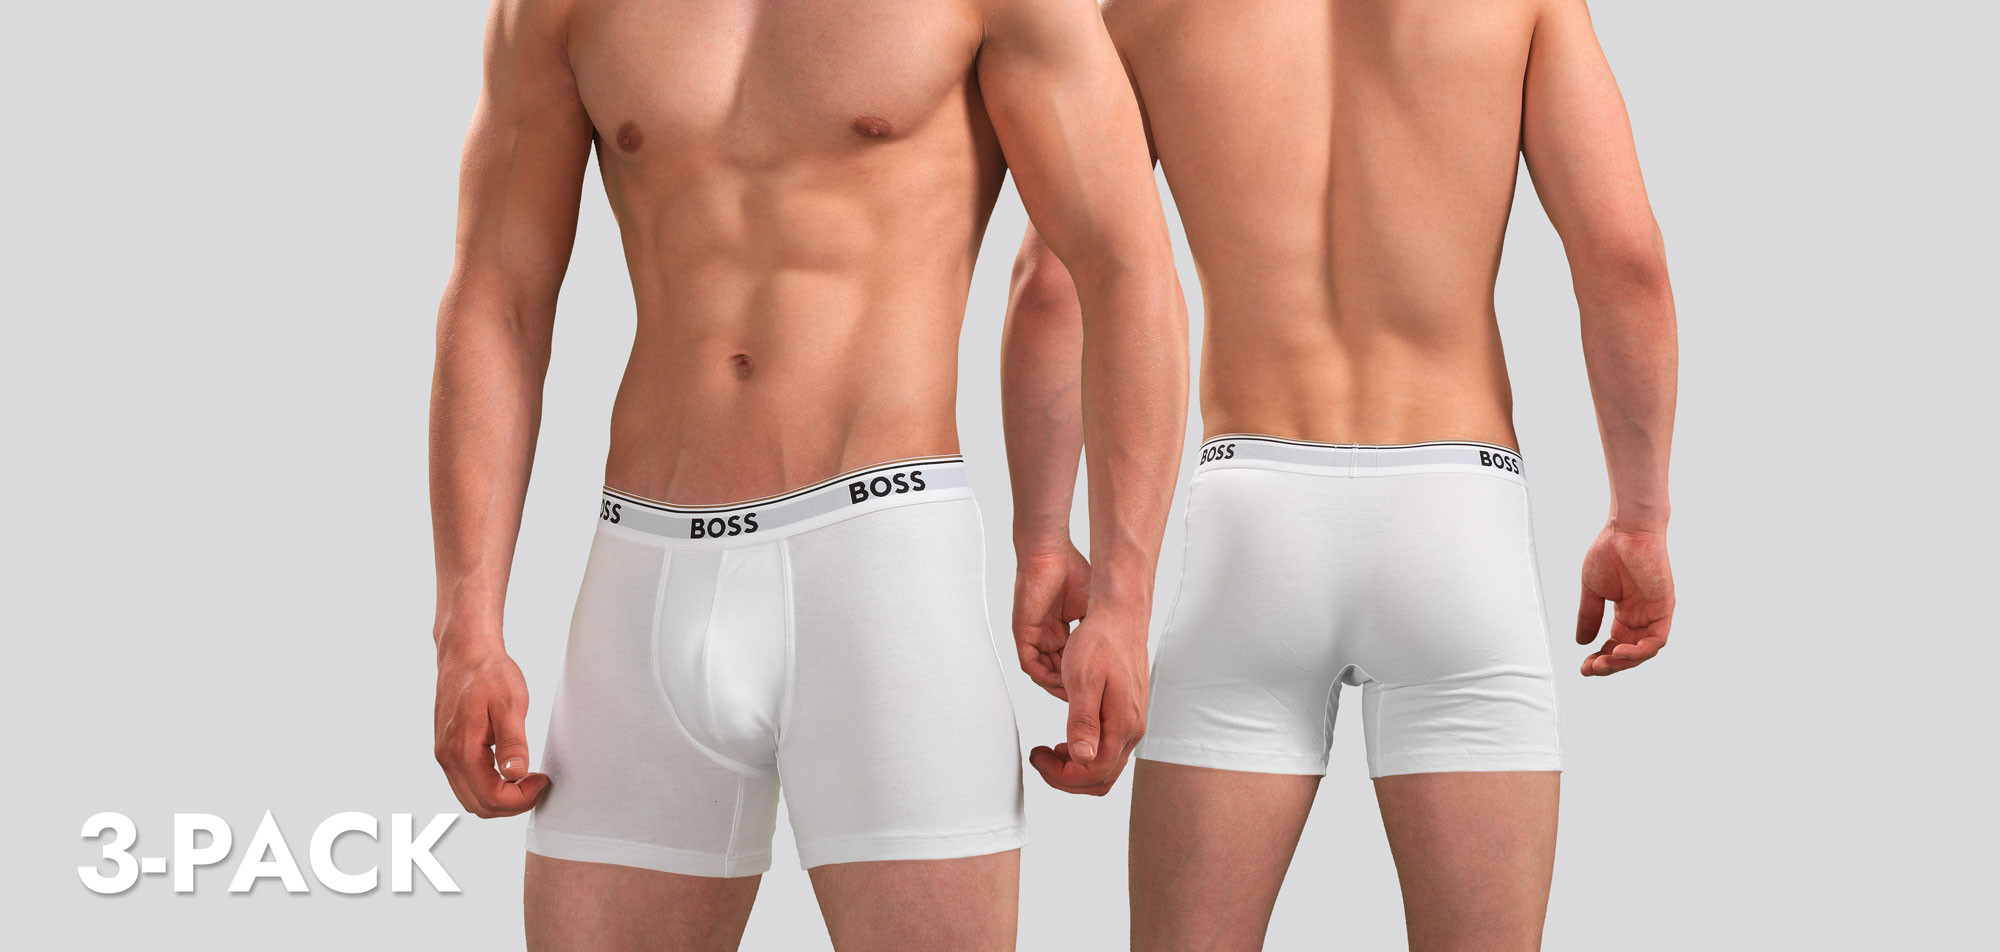 Boss Boxer Brief 3-Pack 282 Power, color Nee